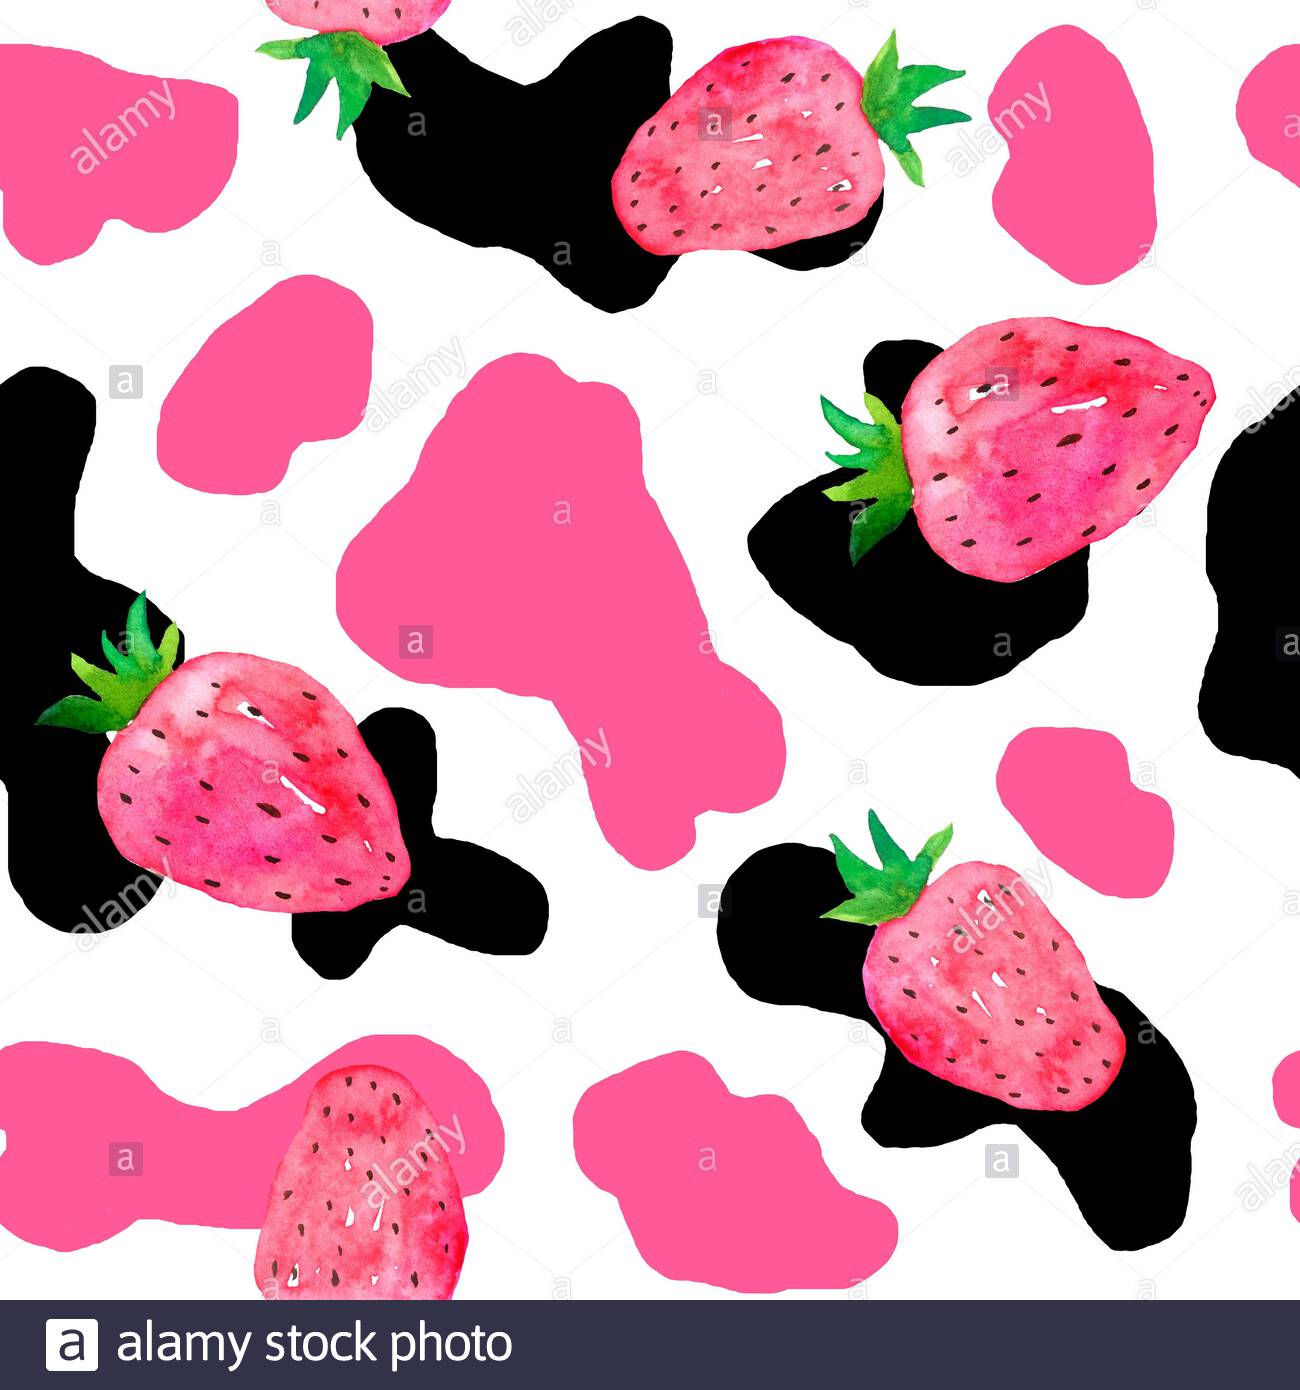 Pin on Strawberry Cow Wallpapers